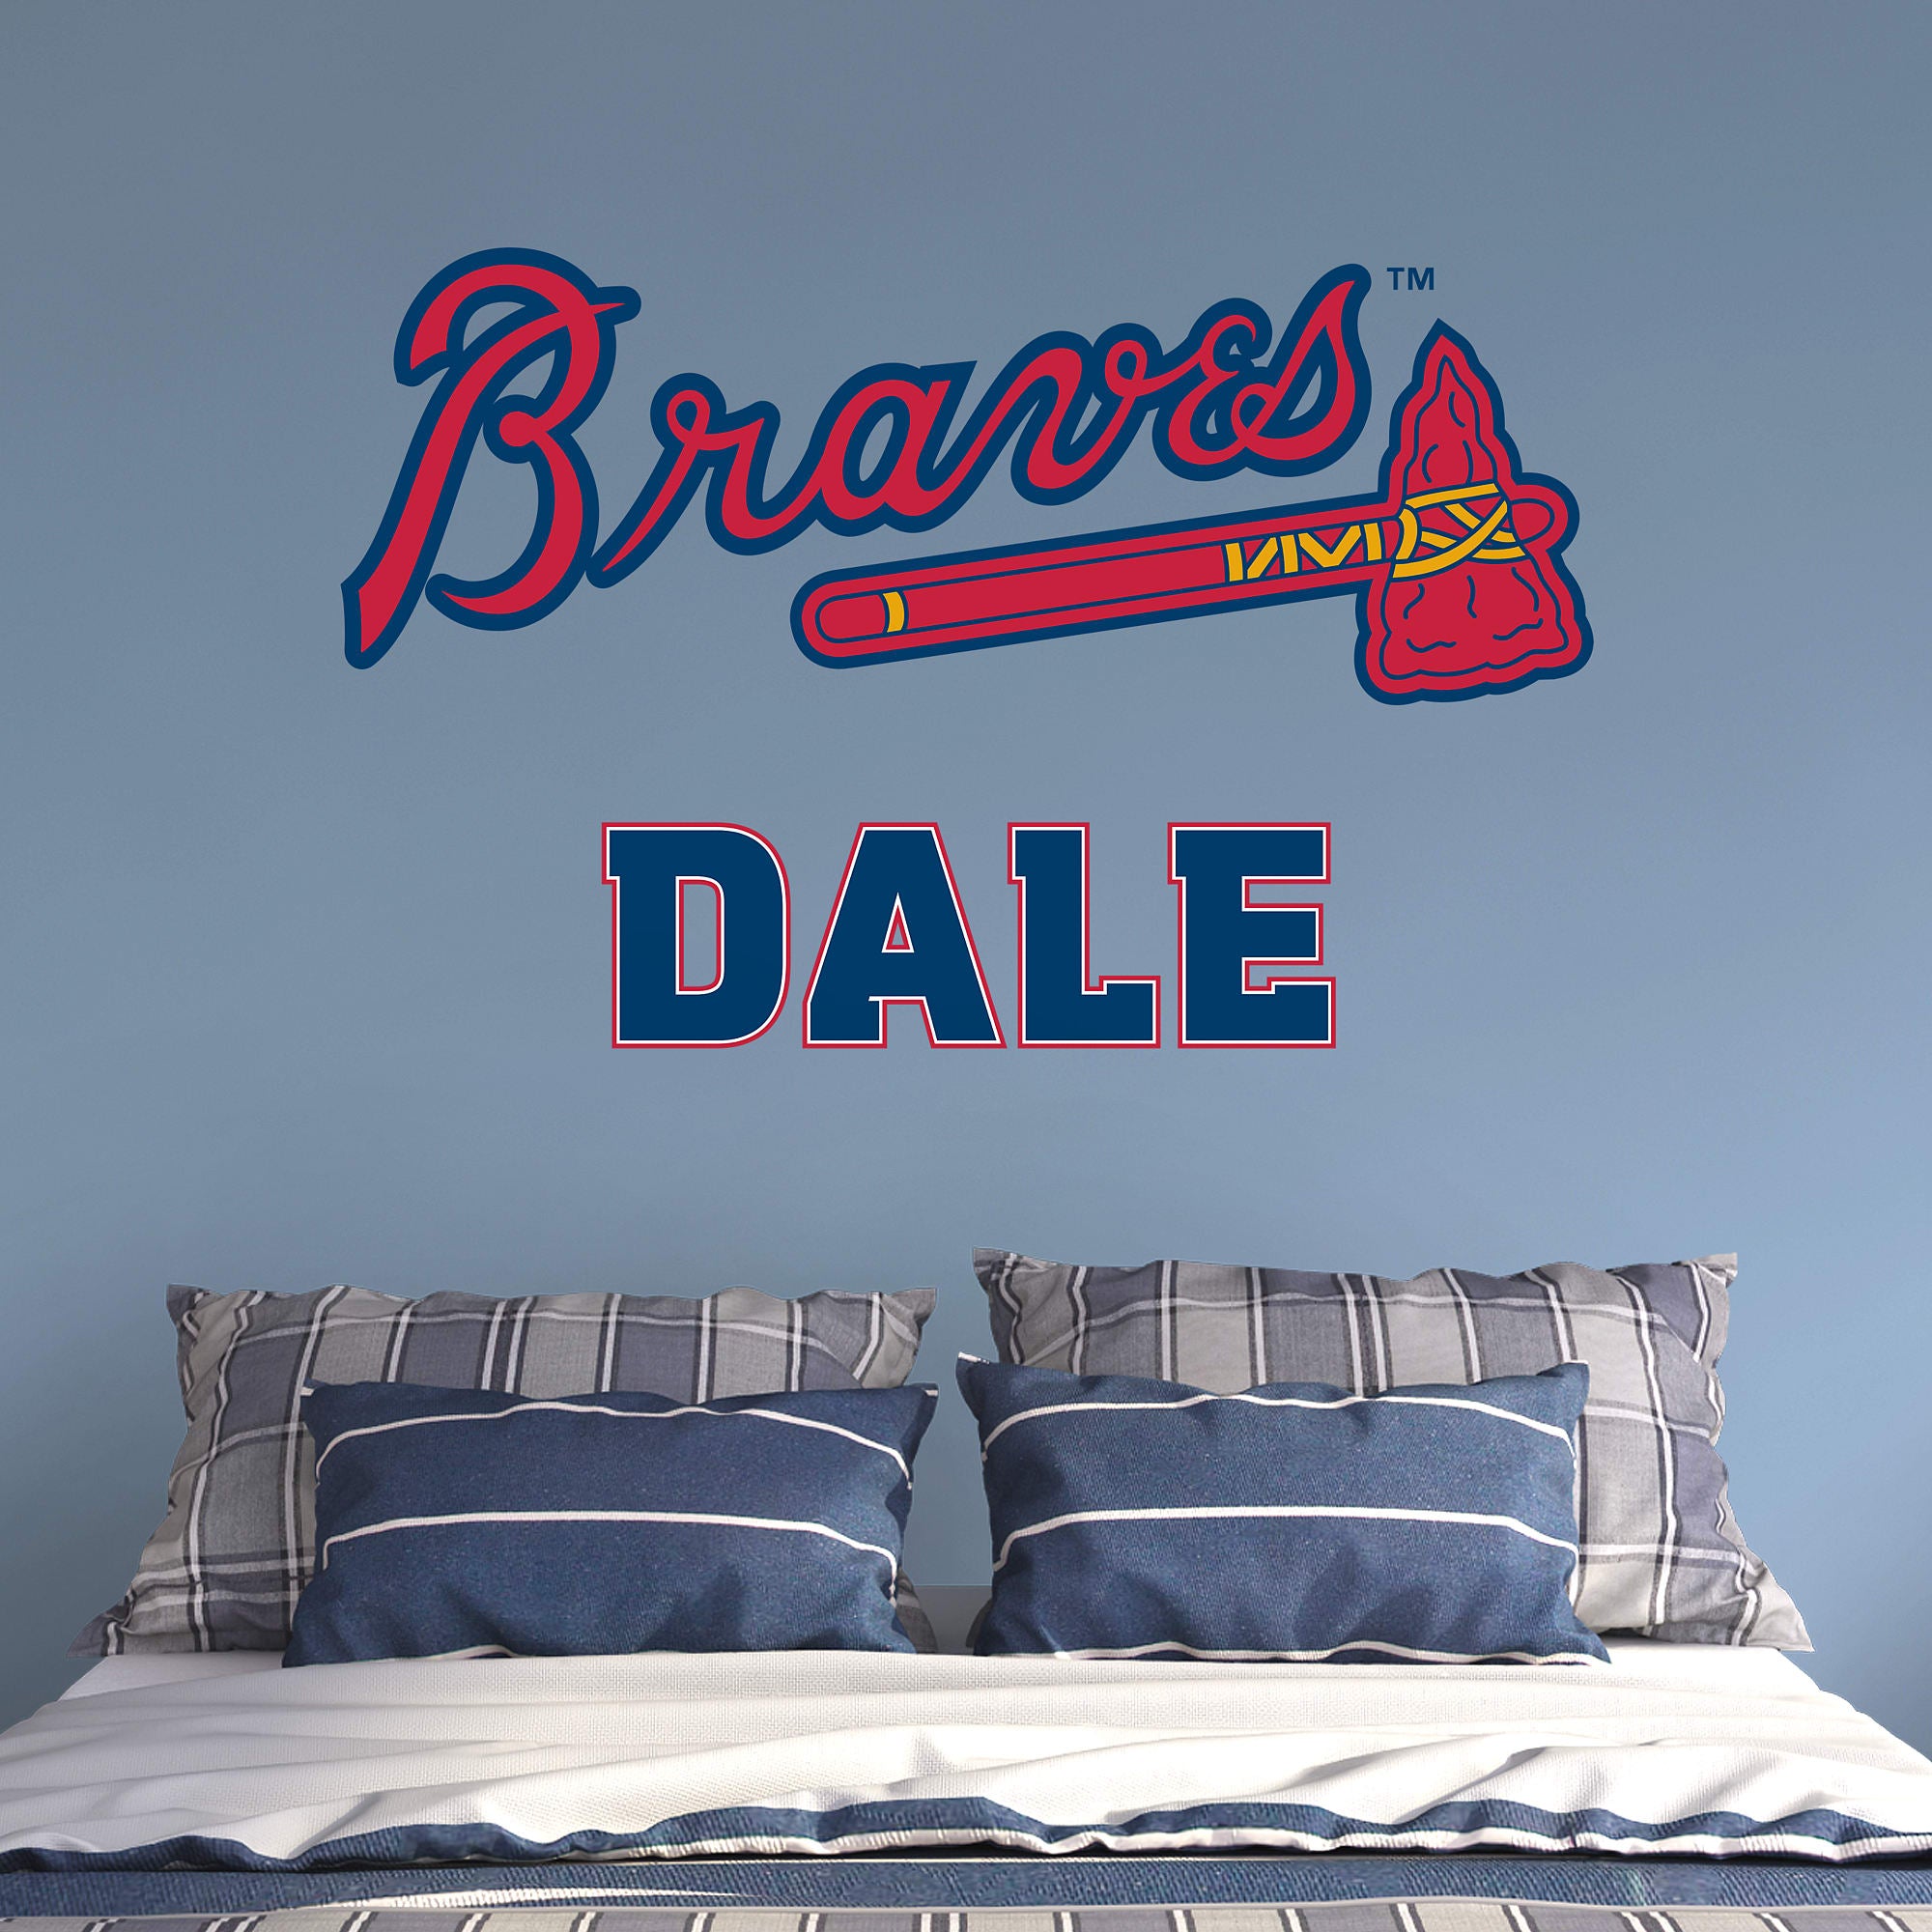 Atlanta Braves: Stacked Personalized Name - Officially Licensed MLB Transfer Decal in Navy (52"W x 39.5"H) by Fathead | Vinyl